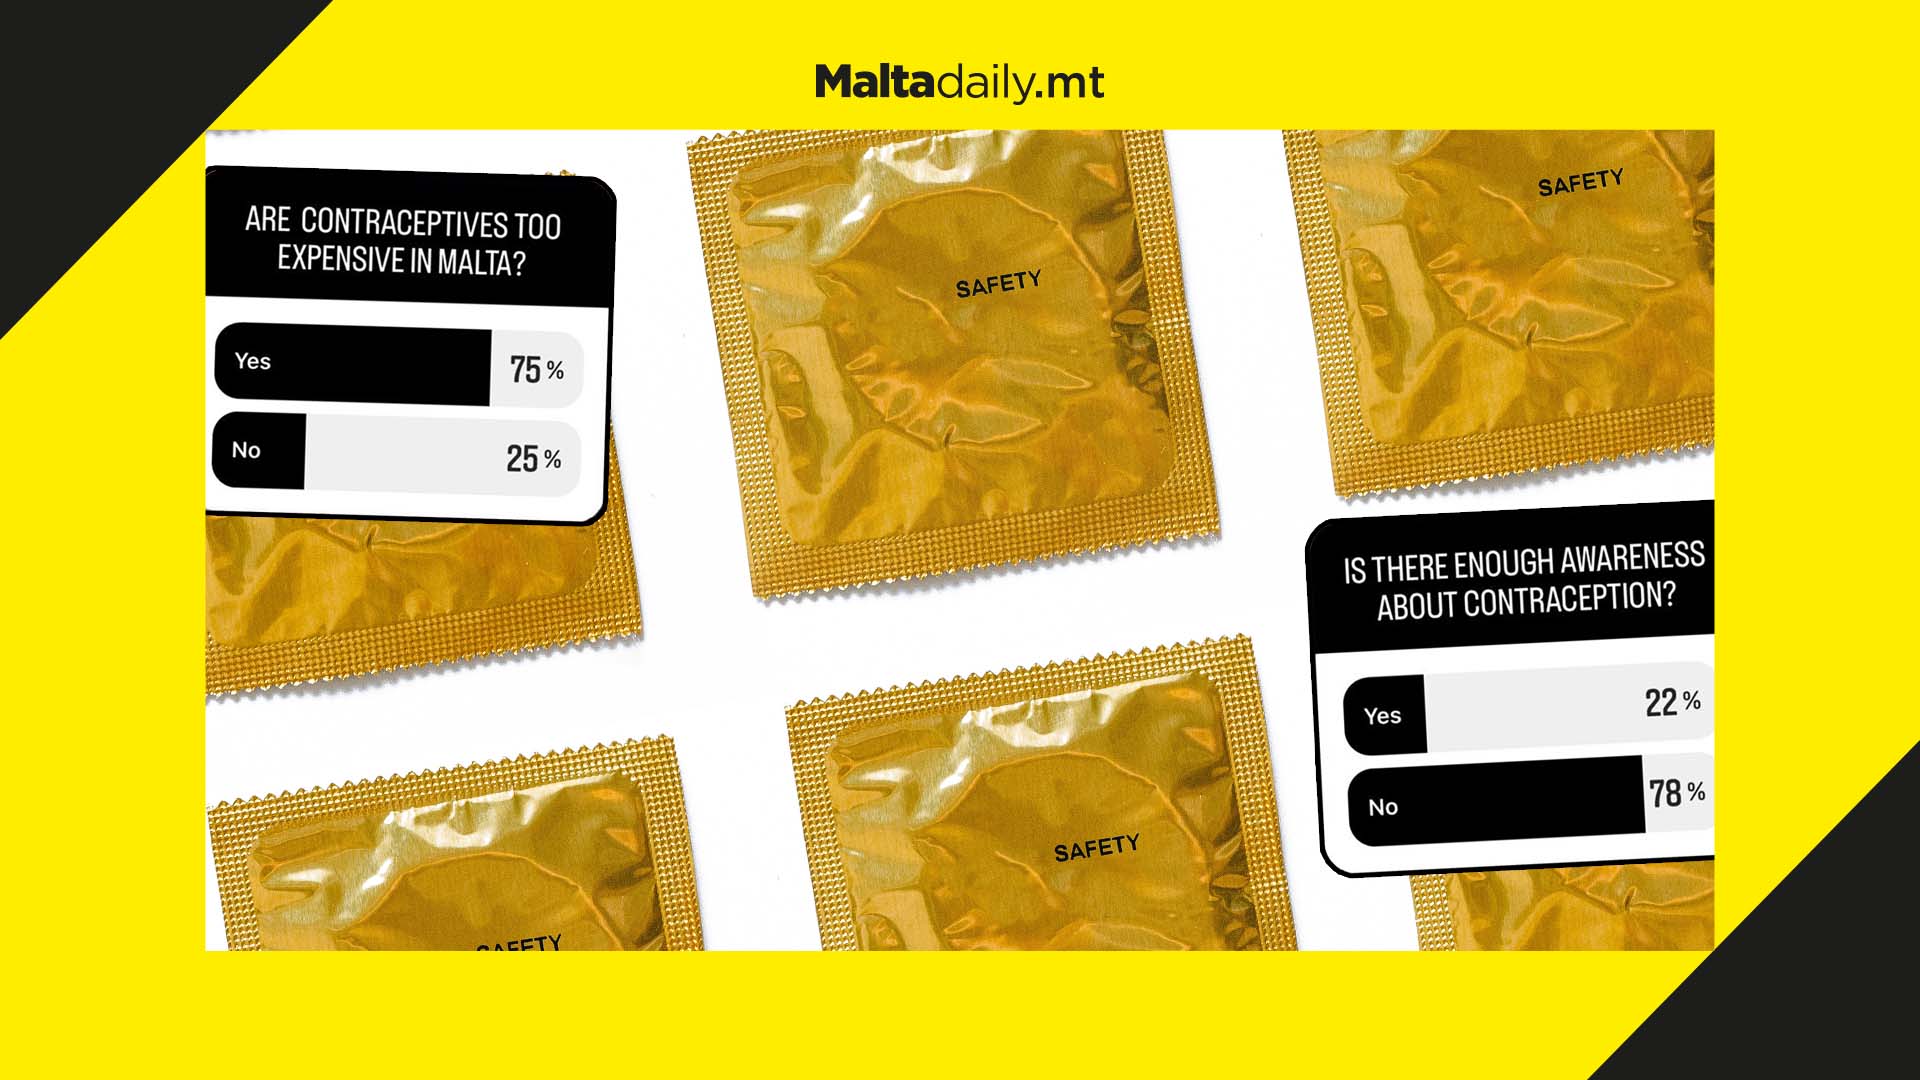 Contraceptives too expensive in Malta with not enough awareness, poll suggests